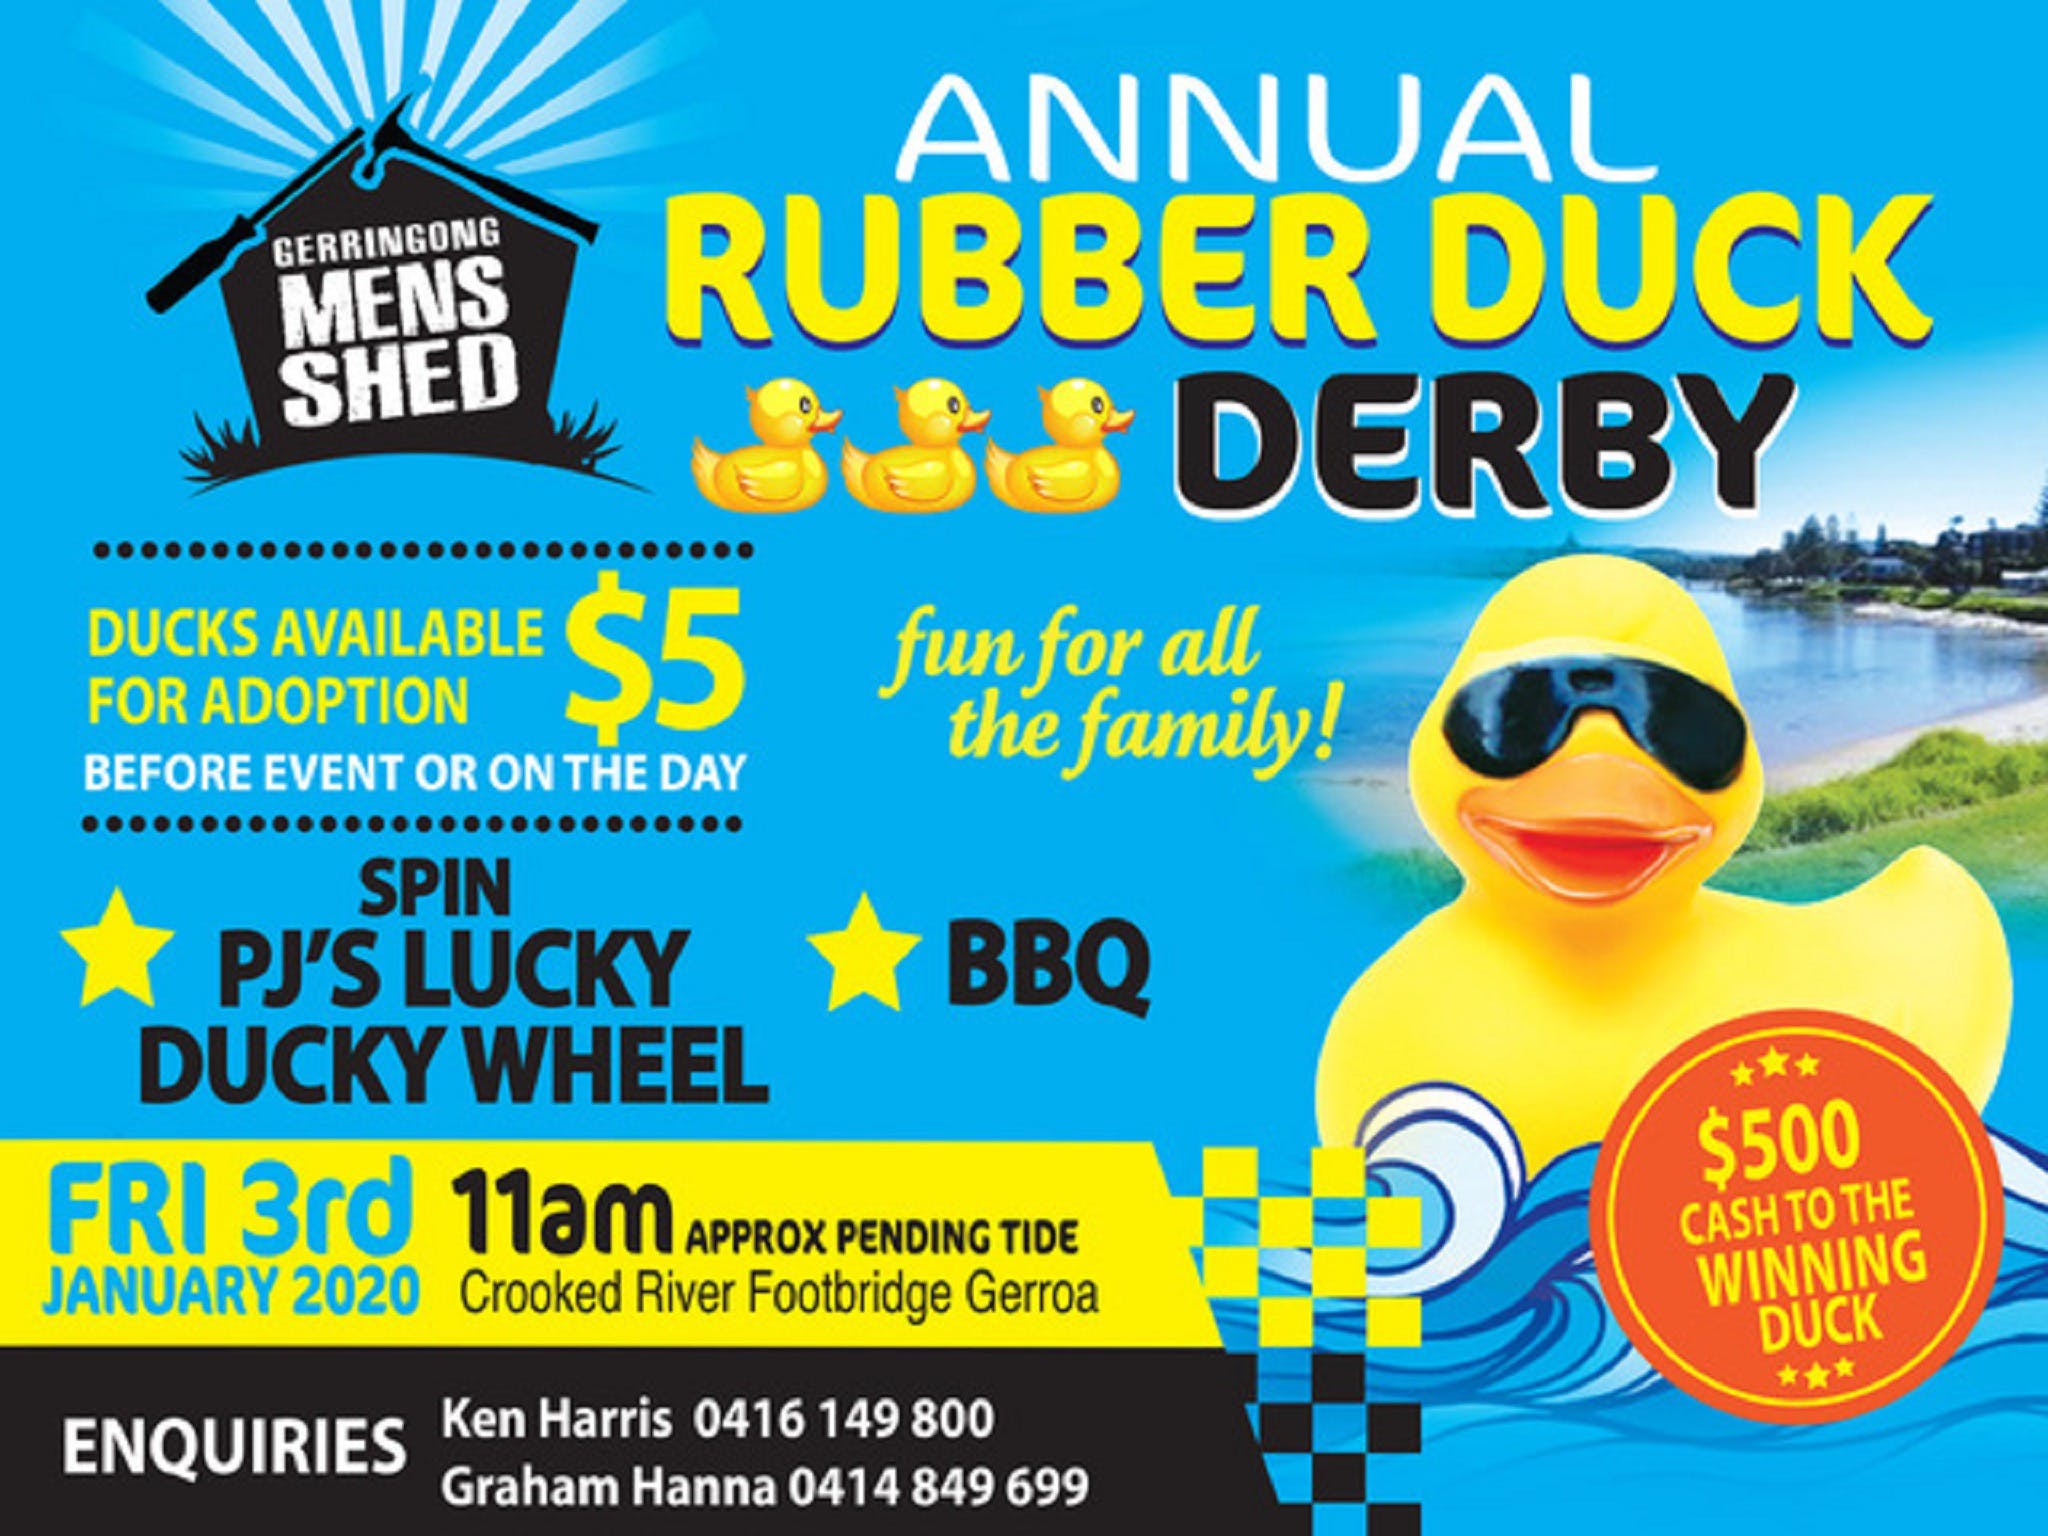 Gerringong Mens Shed Annual Duck Derby - New South Wales Tourism 